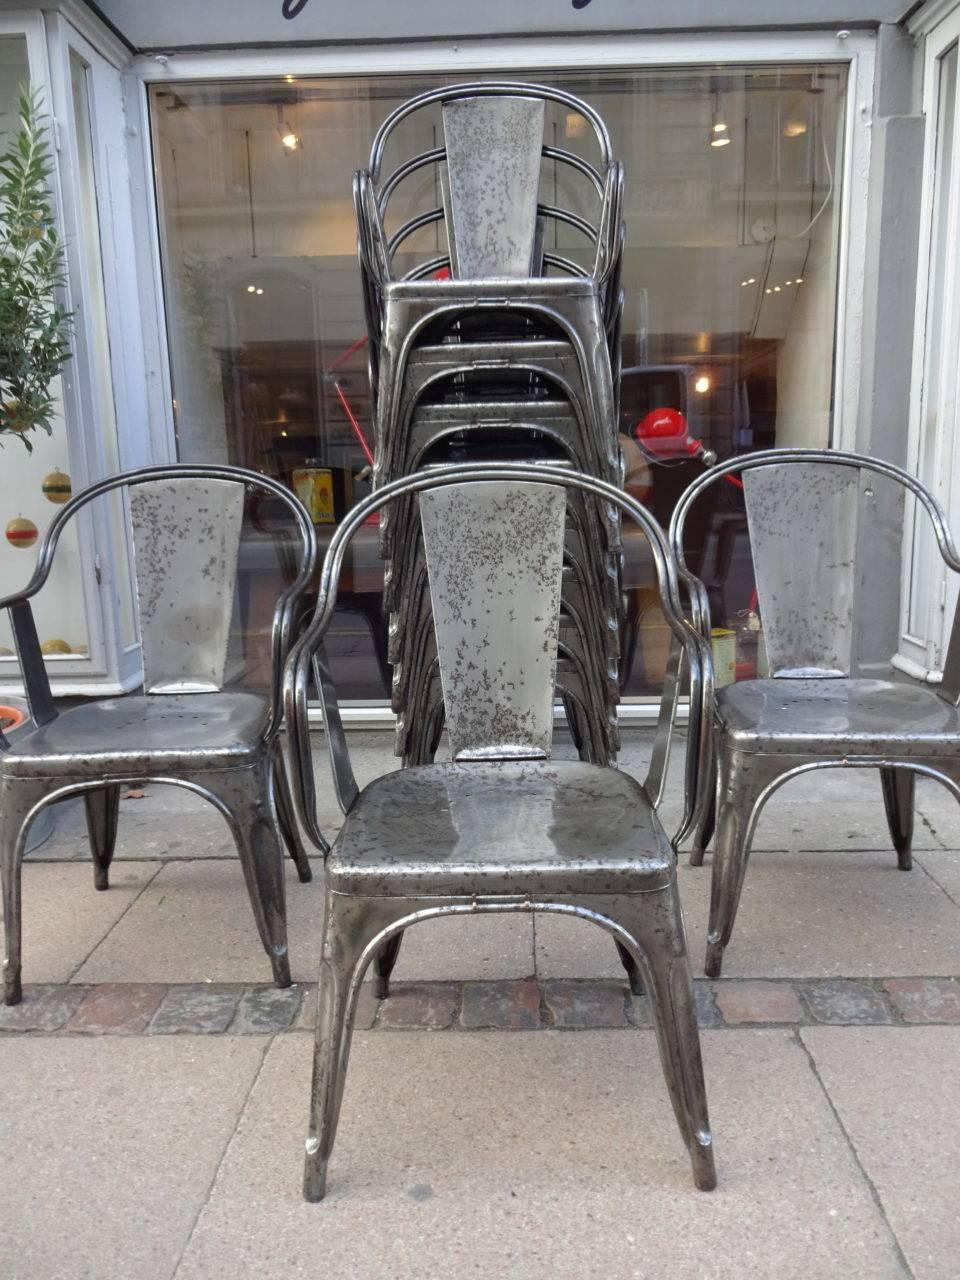 Fabulous vintage French metal Tolix chairs with armrests, designed by Xavier Pouchard. Produced since 1934, they are also displayed at New York’s MoMA and the Centre Pompidou in Paris. Appears in treated and polished iron. Super patina.